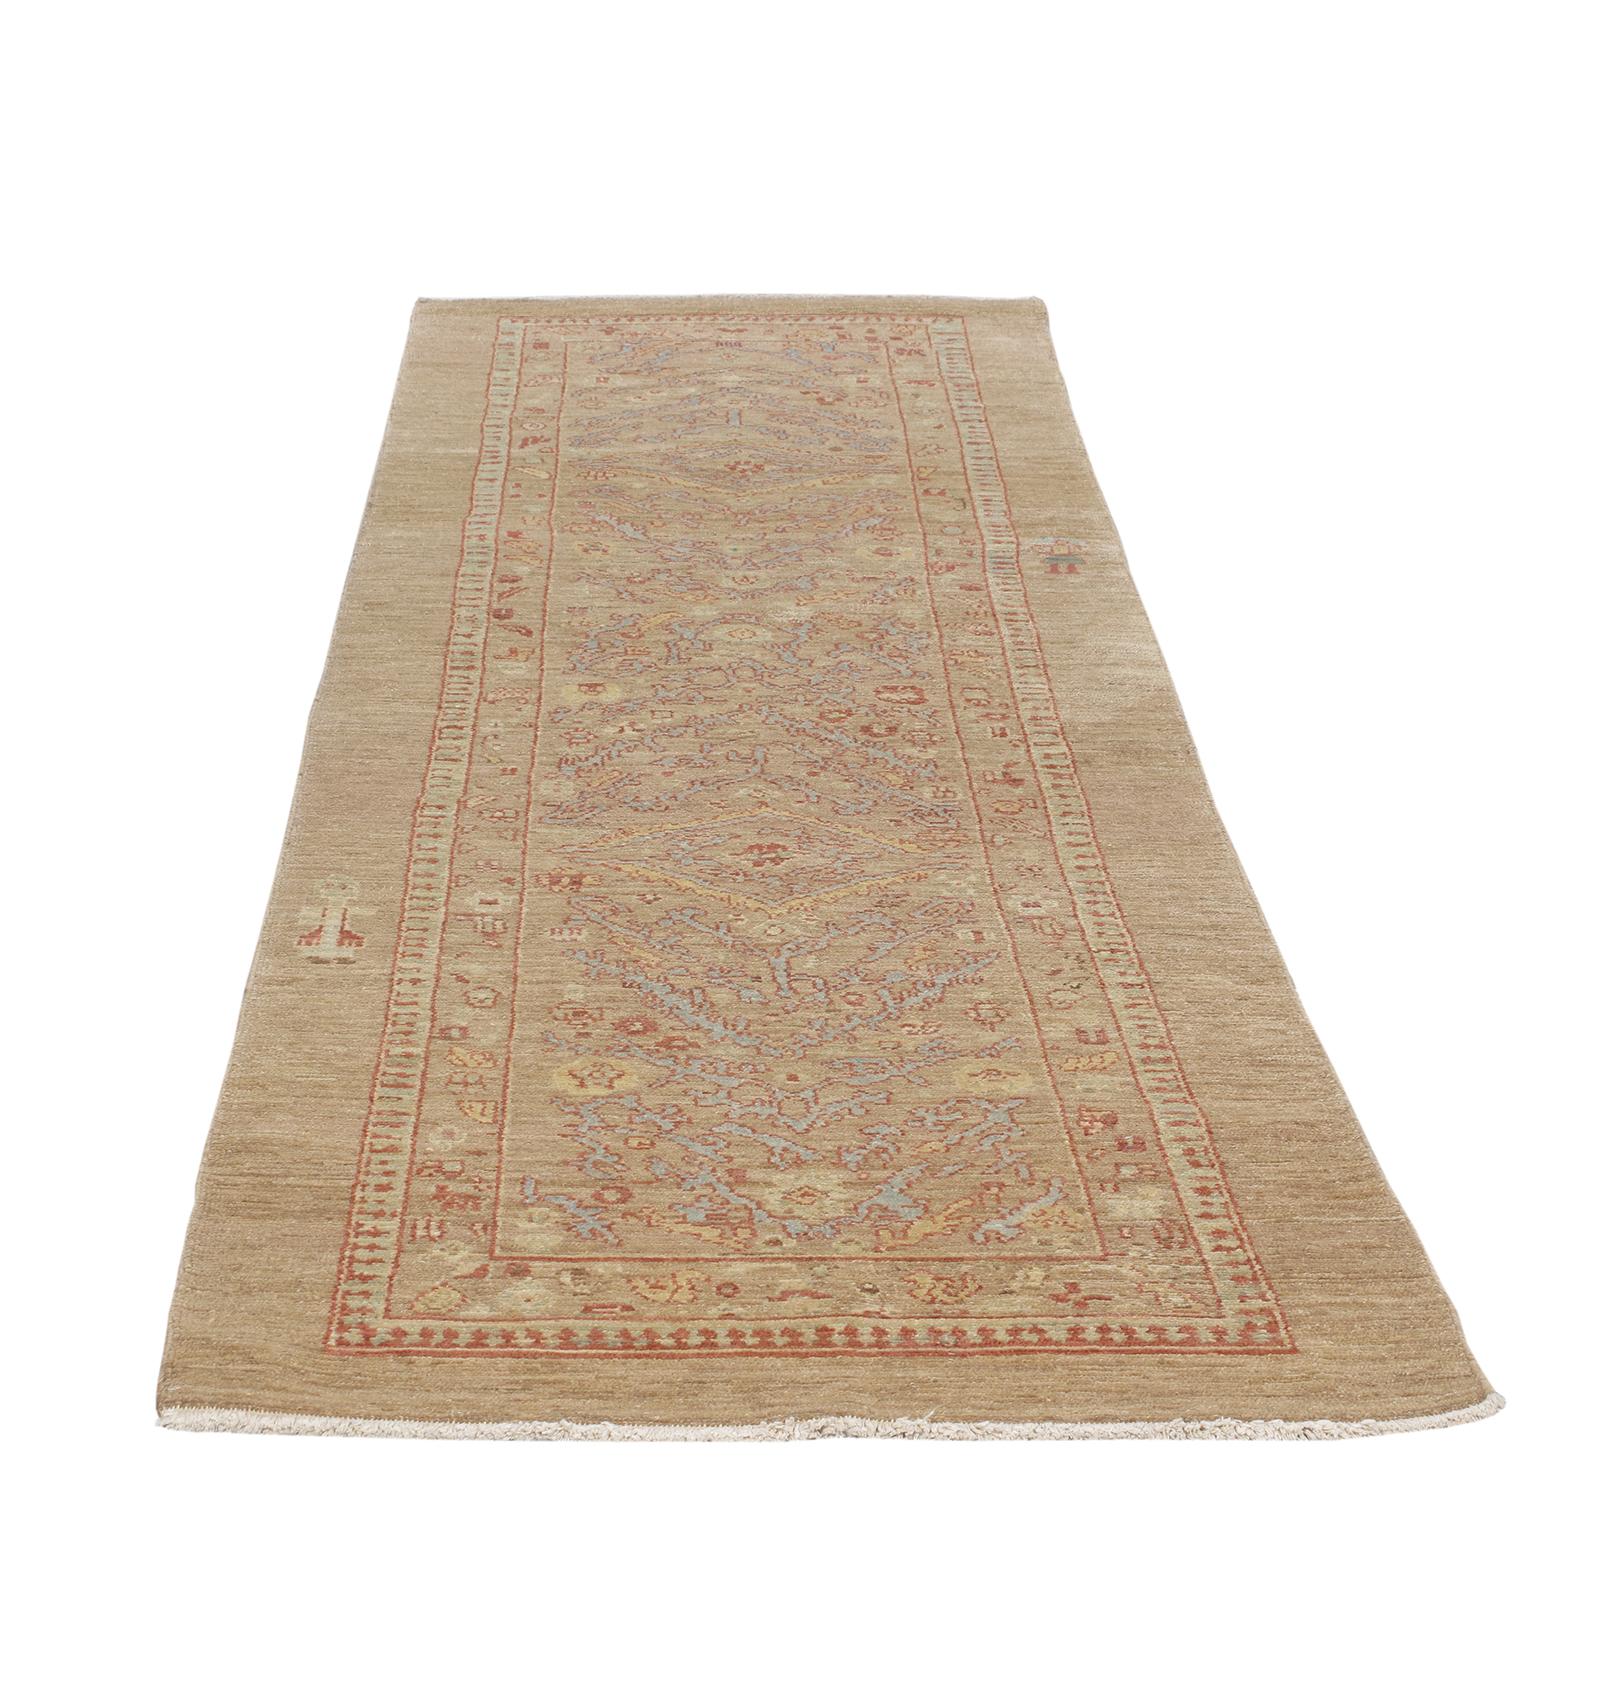 This Persian tribal hand knotted rug is hand-carded with the finest wool, and made with all natural dyes by the local Kurdish artisan weavers in Iran. Custom sizes and colors available. Rug size 2'10